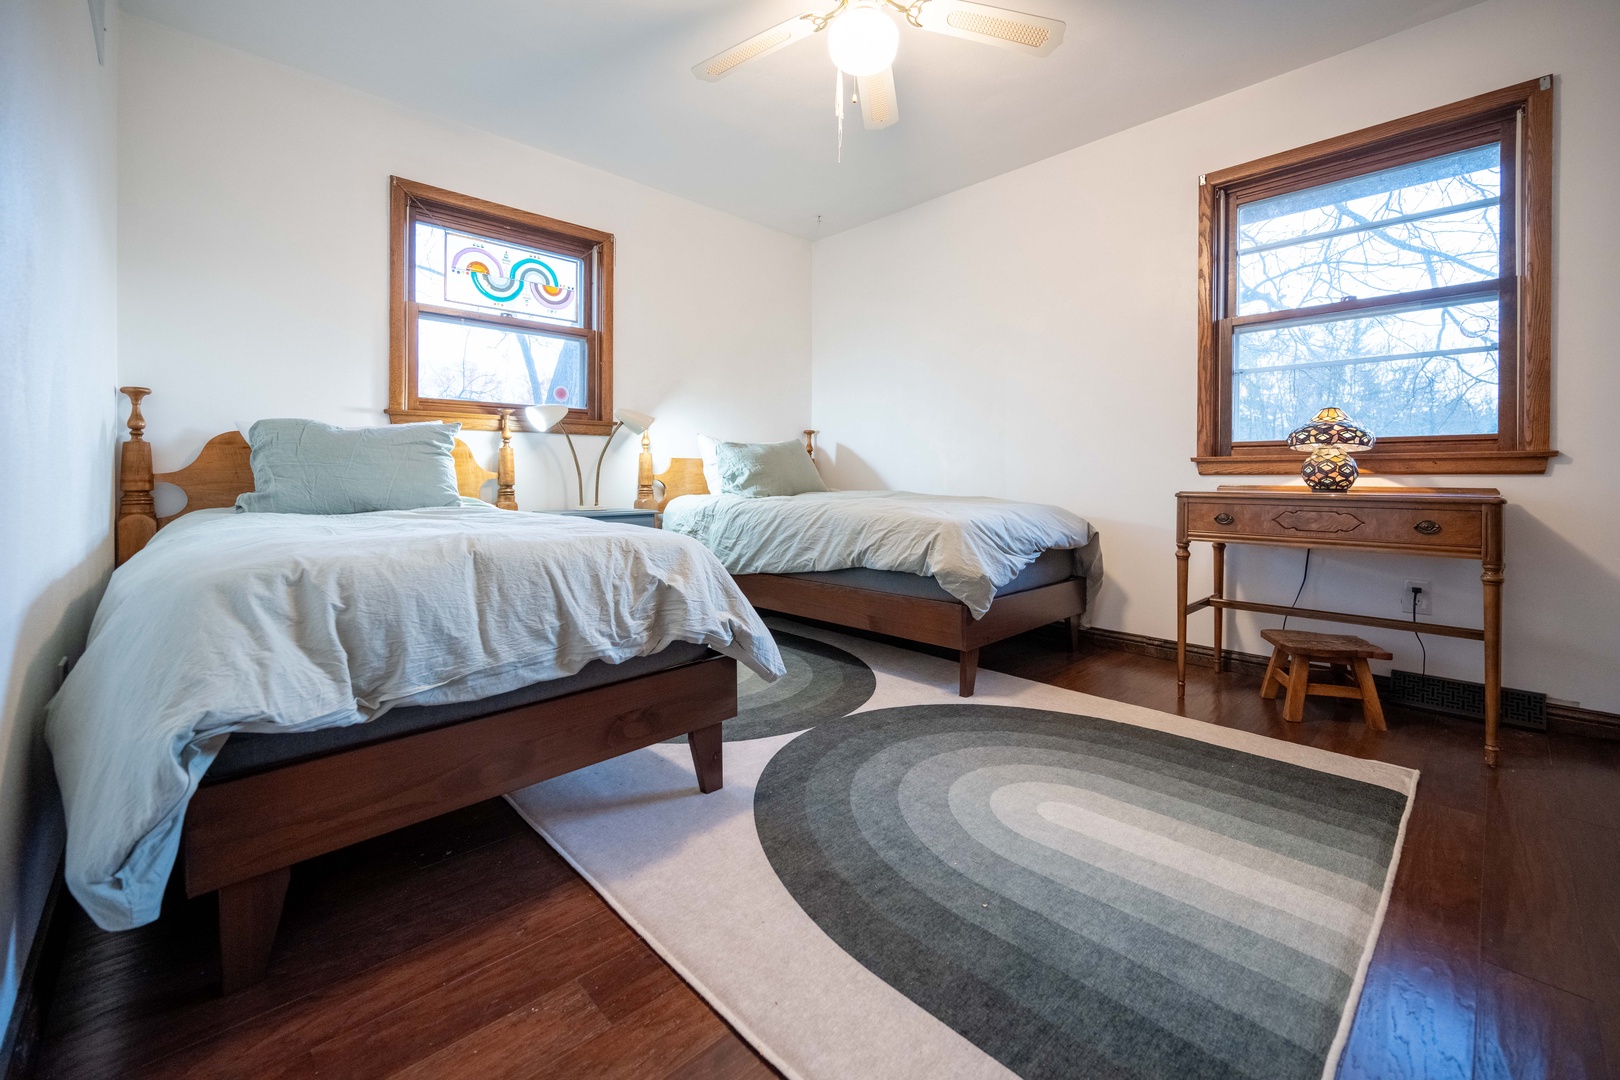 This 2nd floor bedroom offers a pair of cozy twin beds